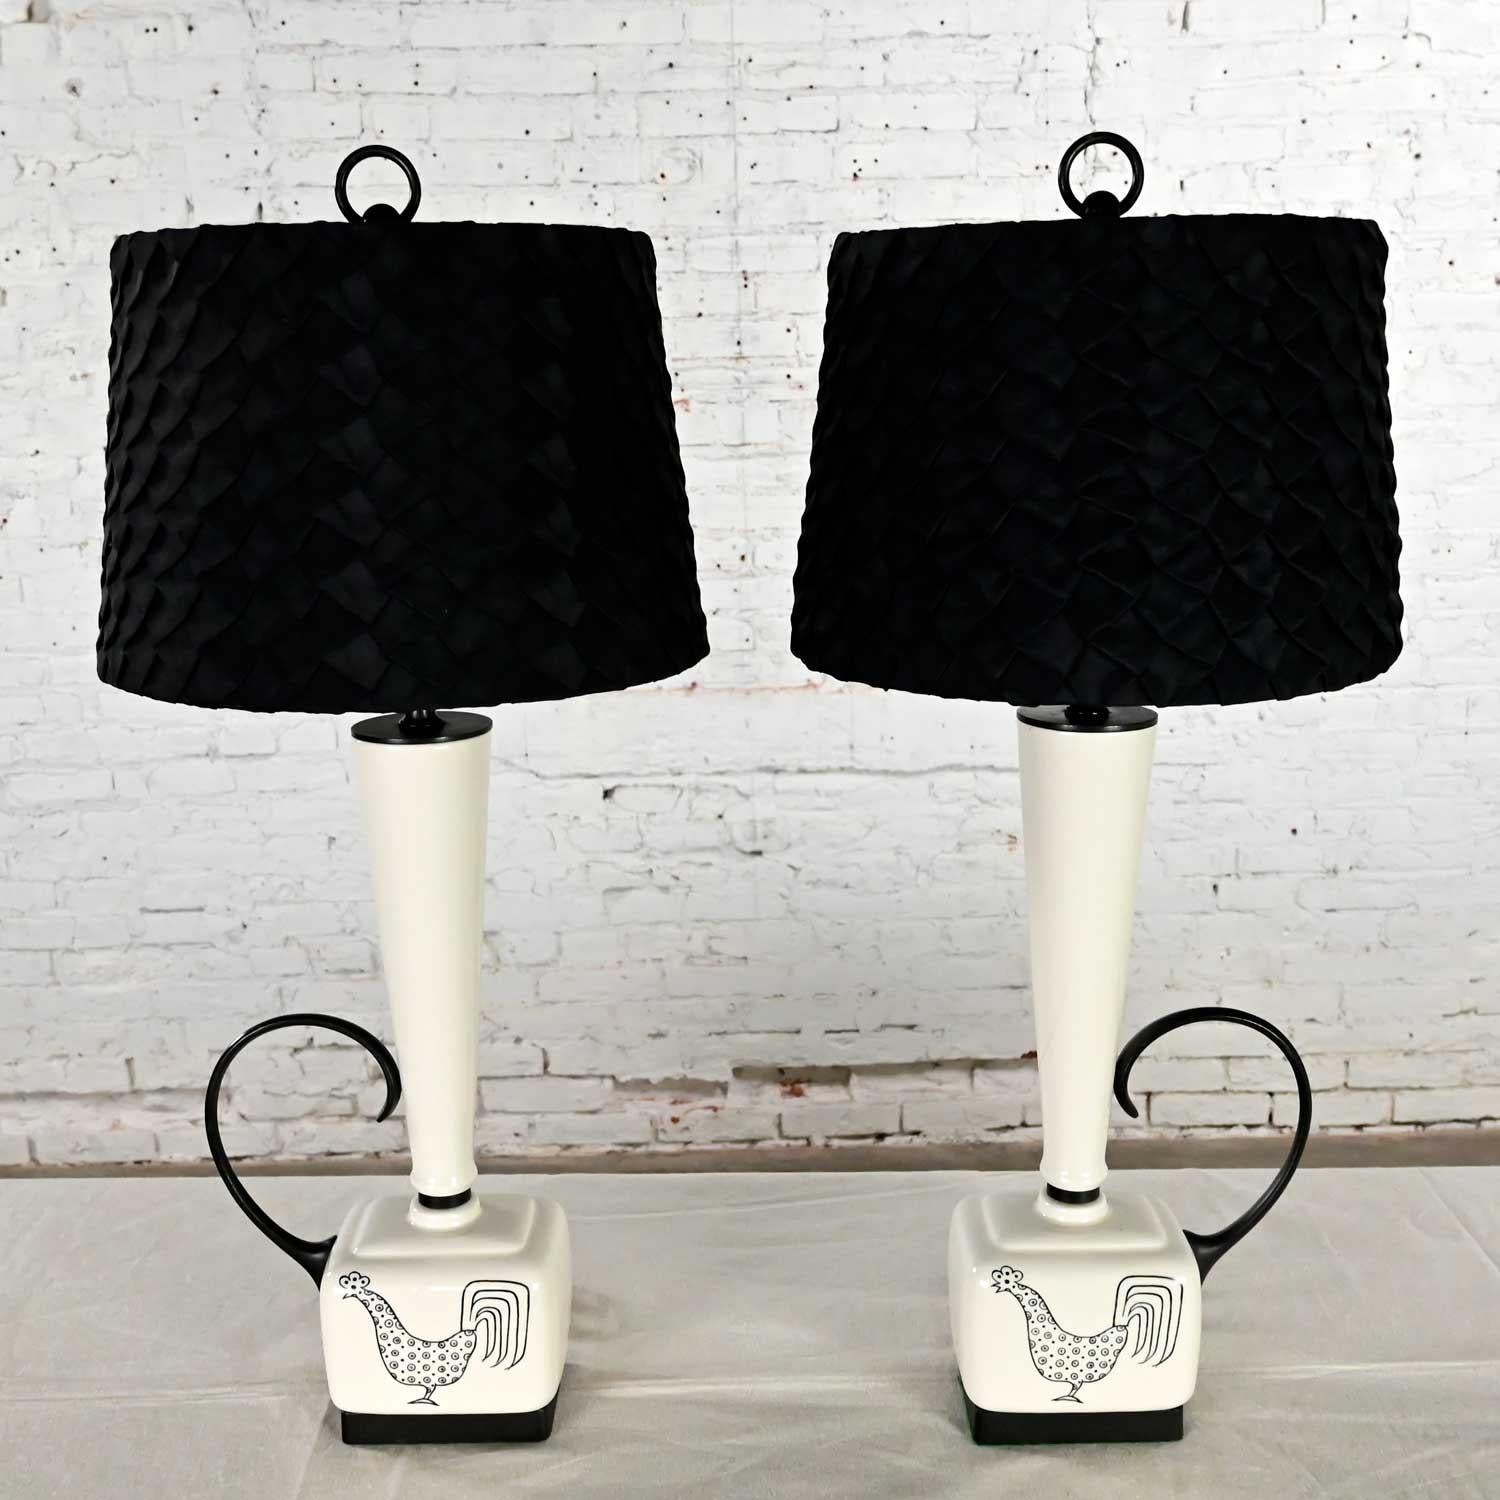 Mid-Century Modern Black and White Ceramic Lamps w/ Rooster Design, a Pair For Sale 8